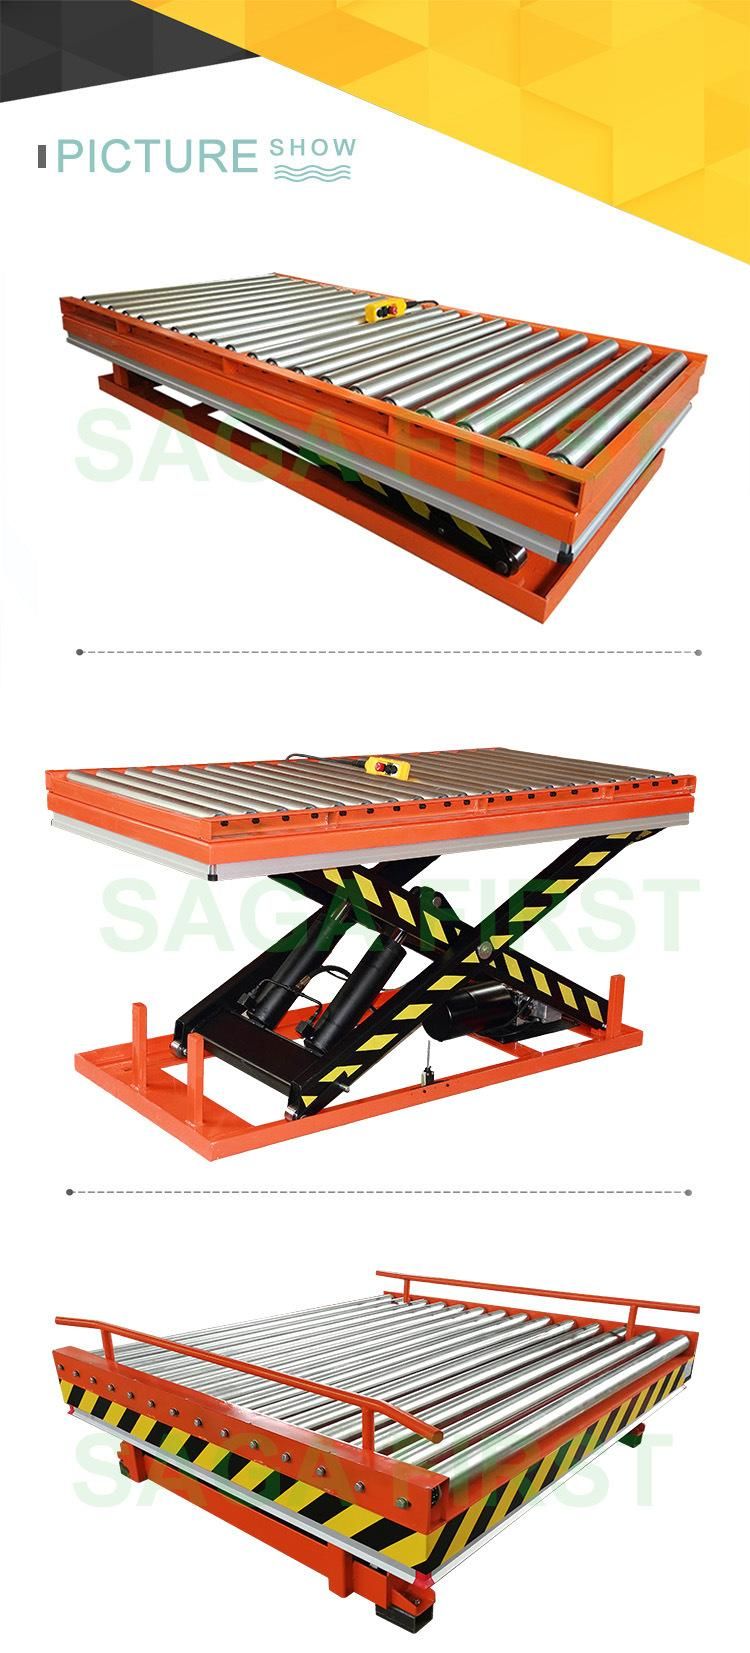 Workshop Equipment Roller Lifter Lift Table for Plywood